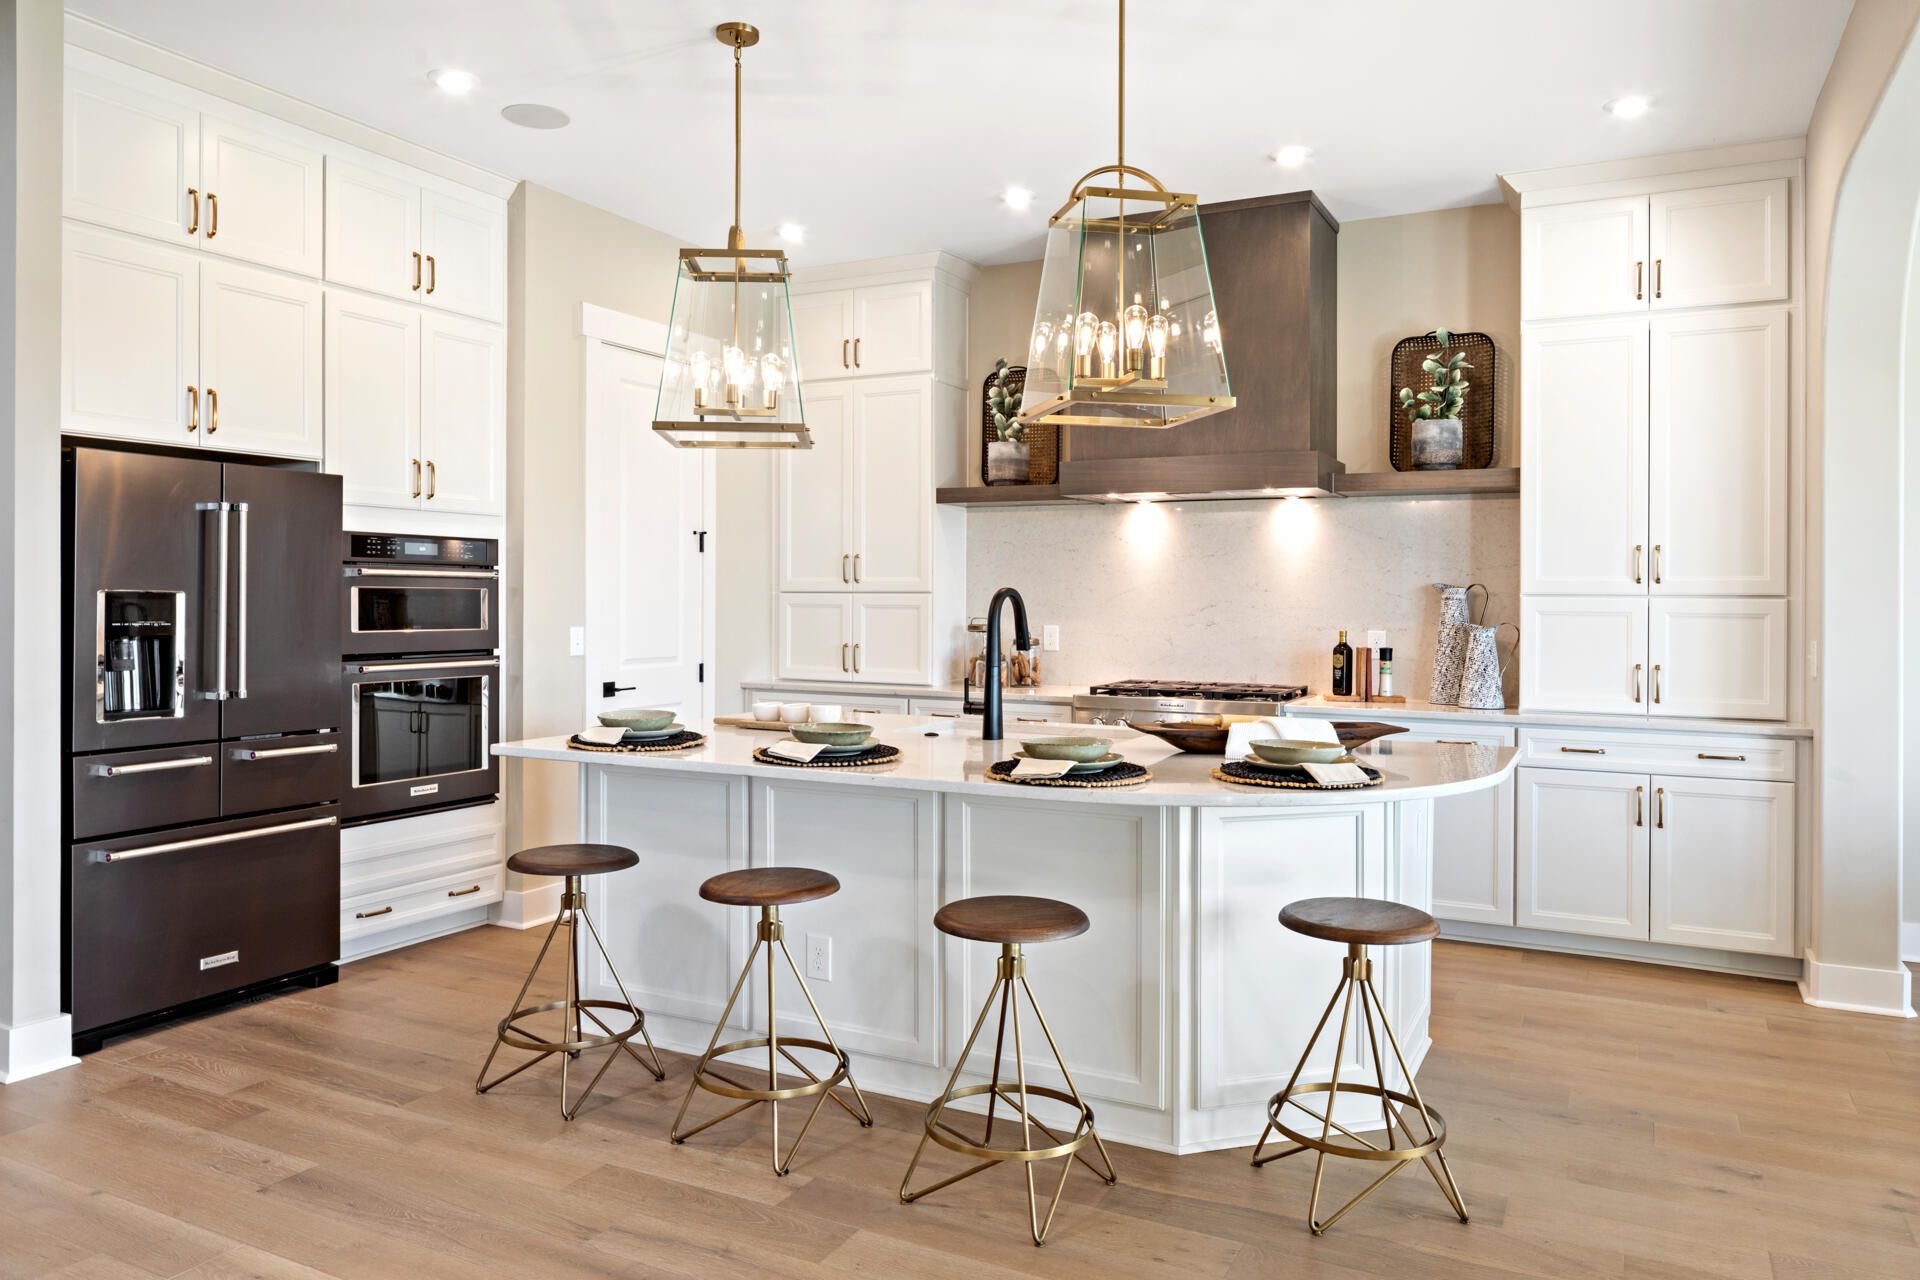 25 Kitchen Trends These Are the Kitchen Trends You'll Be Seeing ...